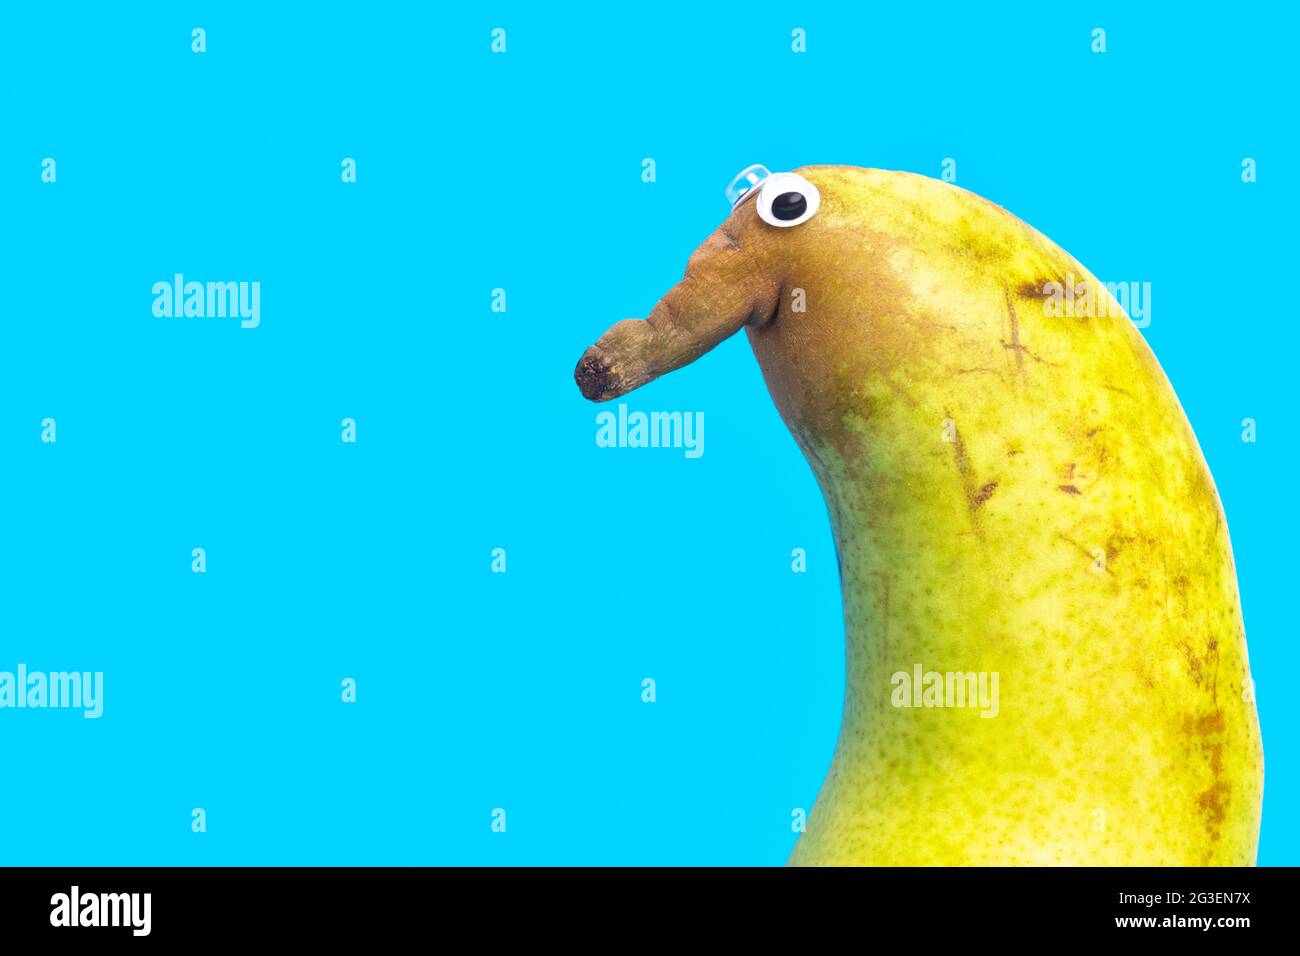 Close-up of a cute pear character with a big nose and googly eyes isolated on blue background. Stock Photo